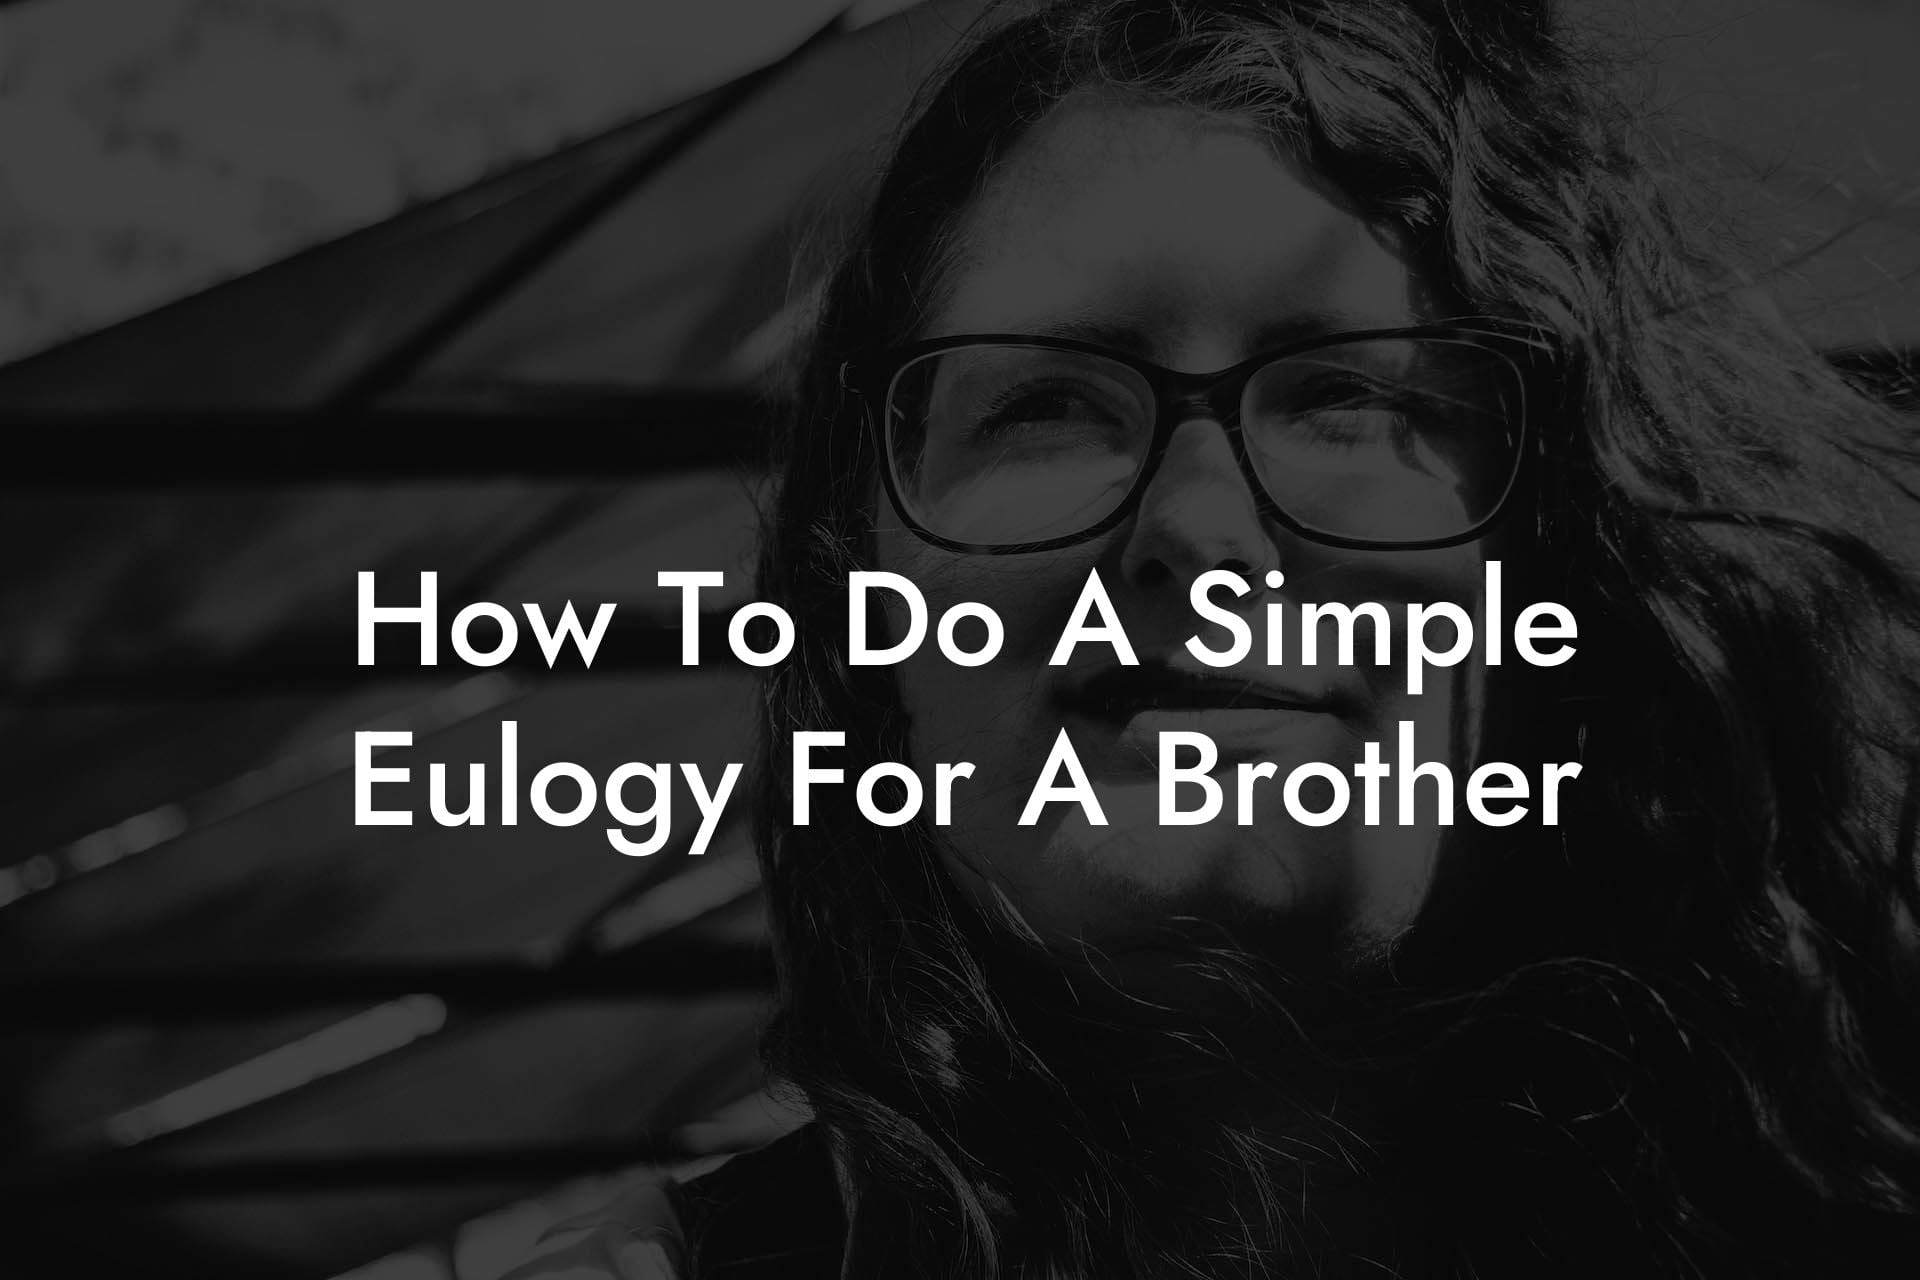 How To Do A Simple Eulogy For A Brother